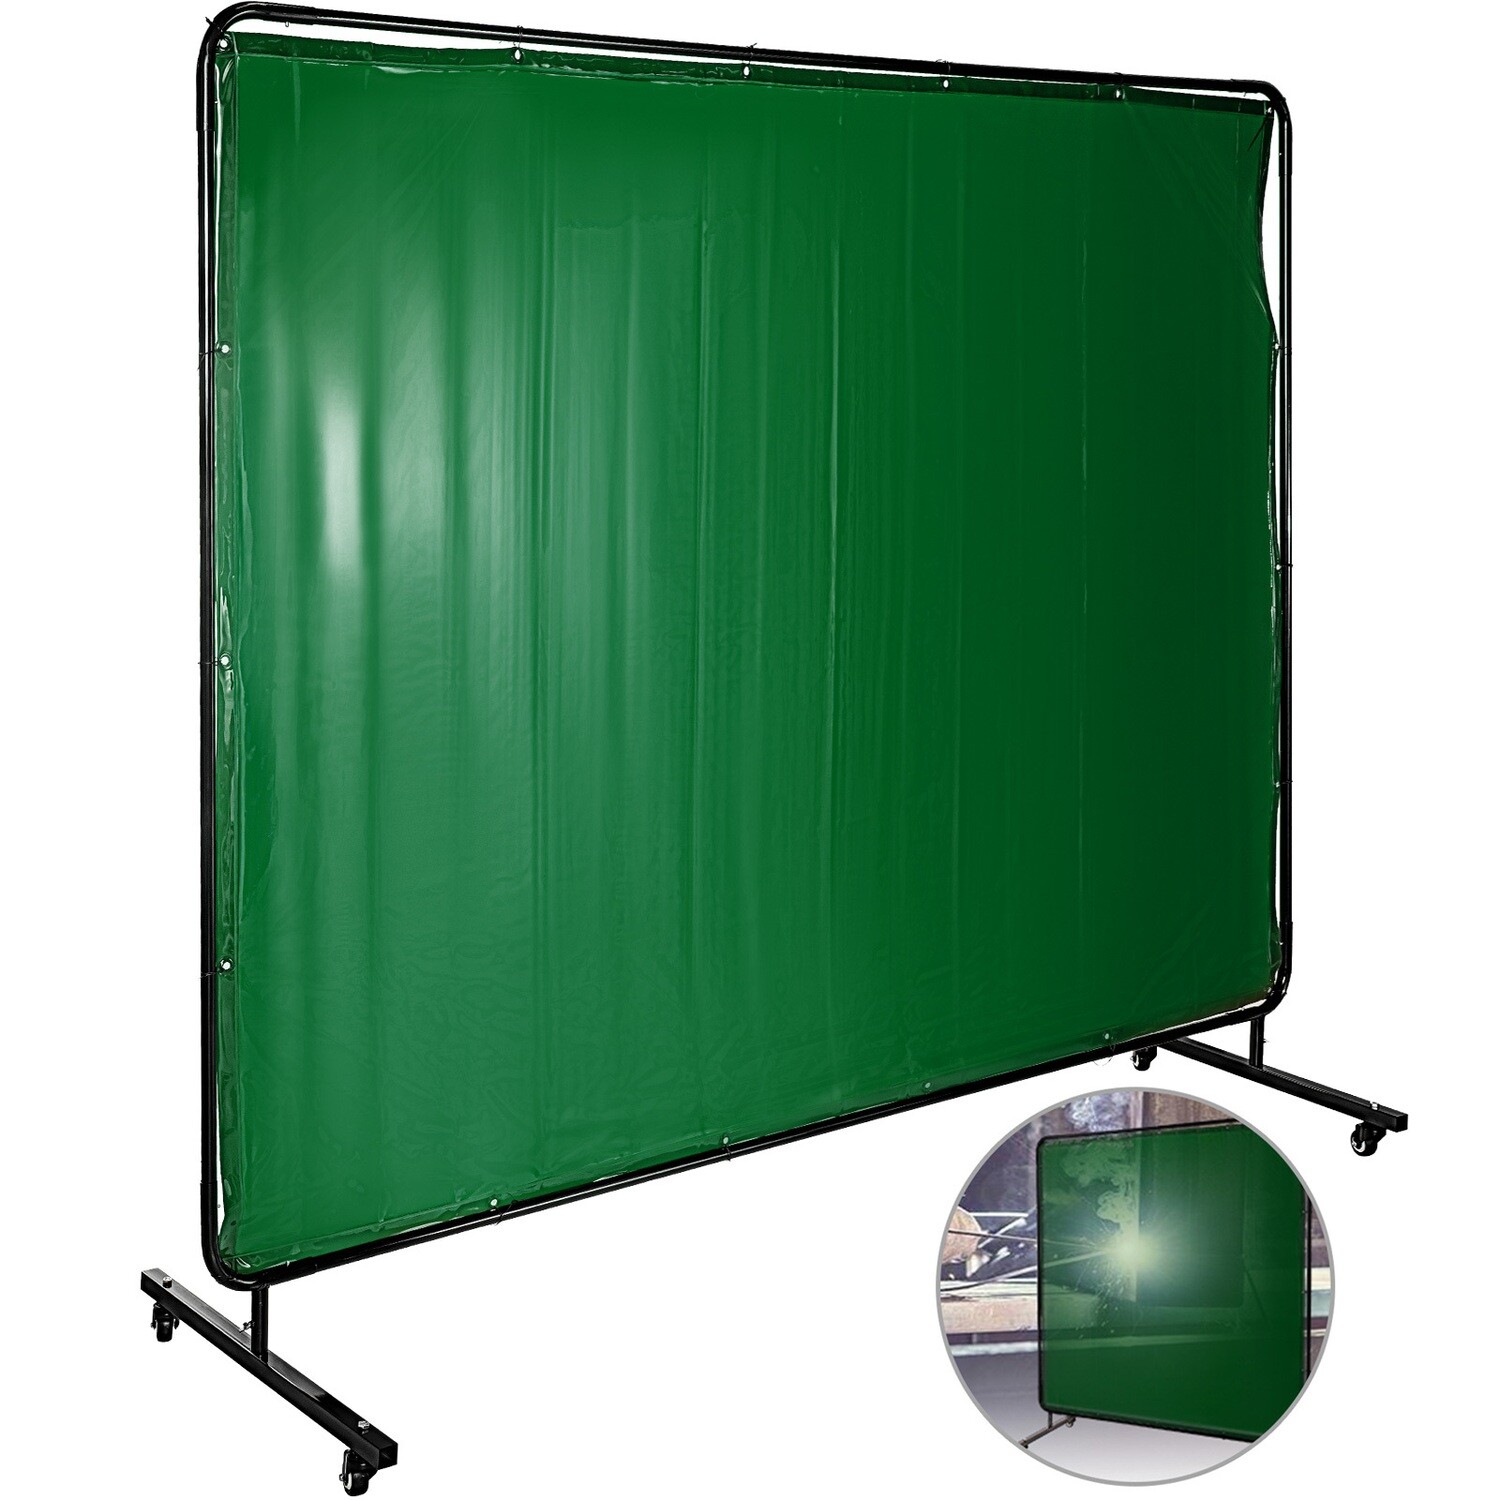 Flame-resistant Vinyl 8' x 6' Welding Curtain with Frame and 4 Wheels